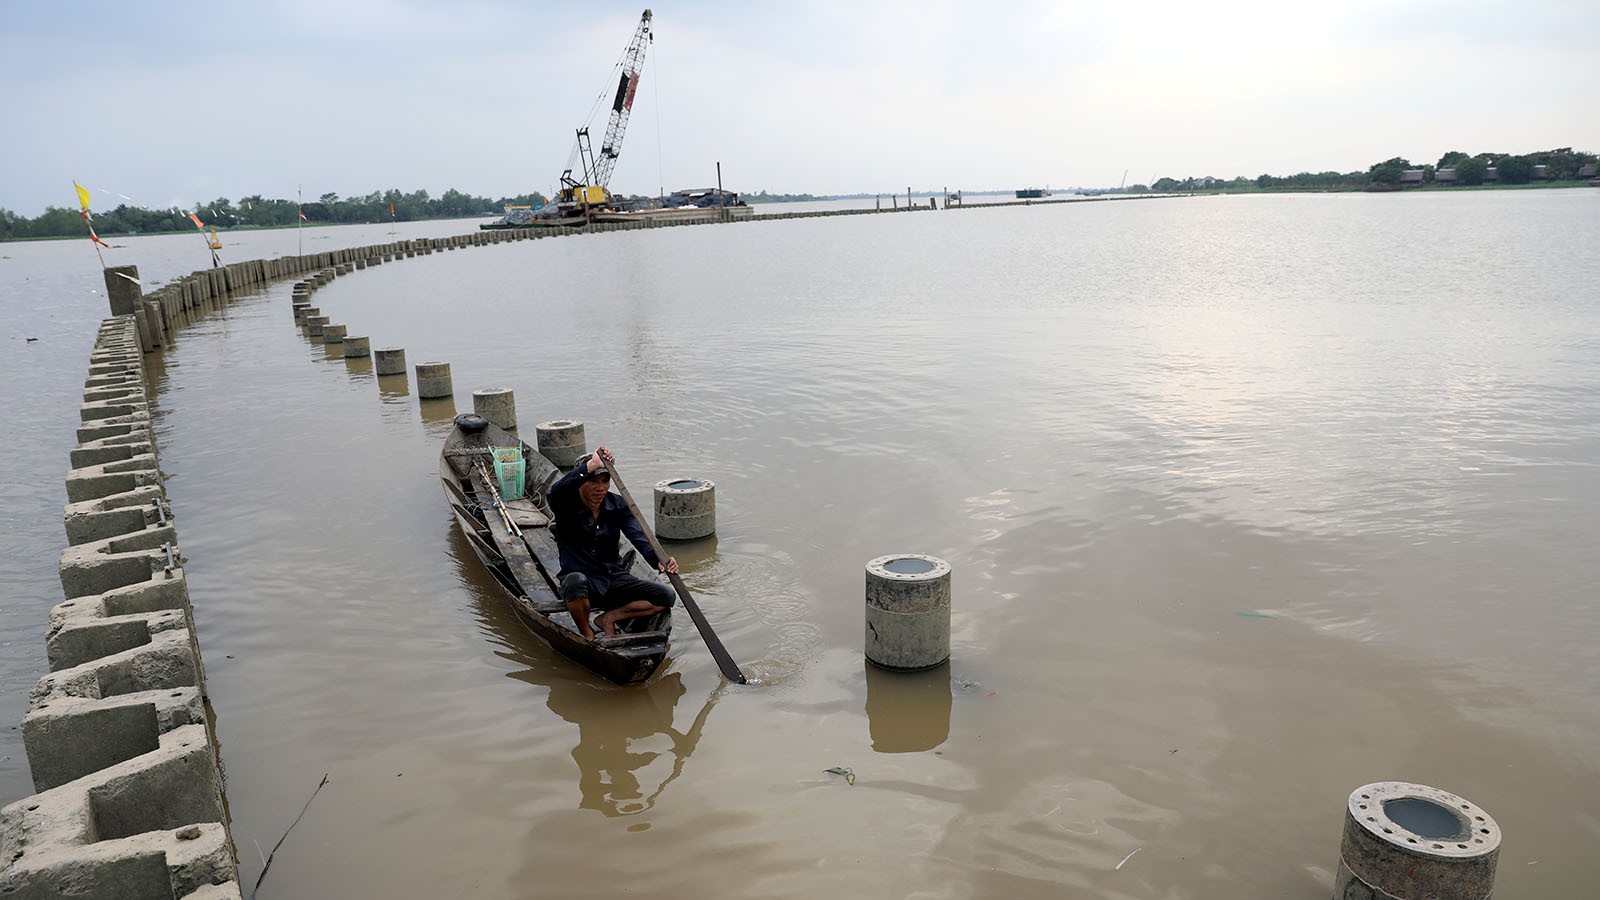 ​Fruit park project encroaches on river, poses subsidence hazards in southern Vietnam